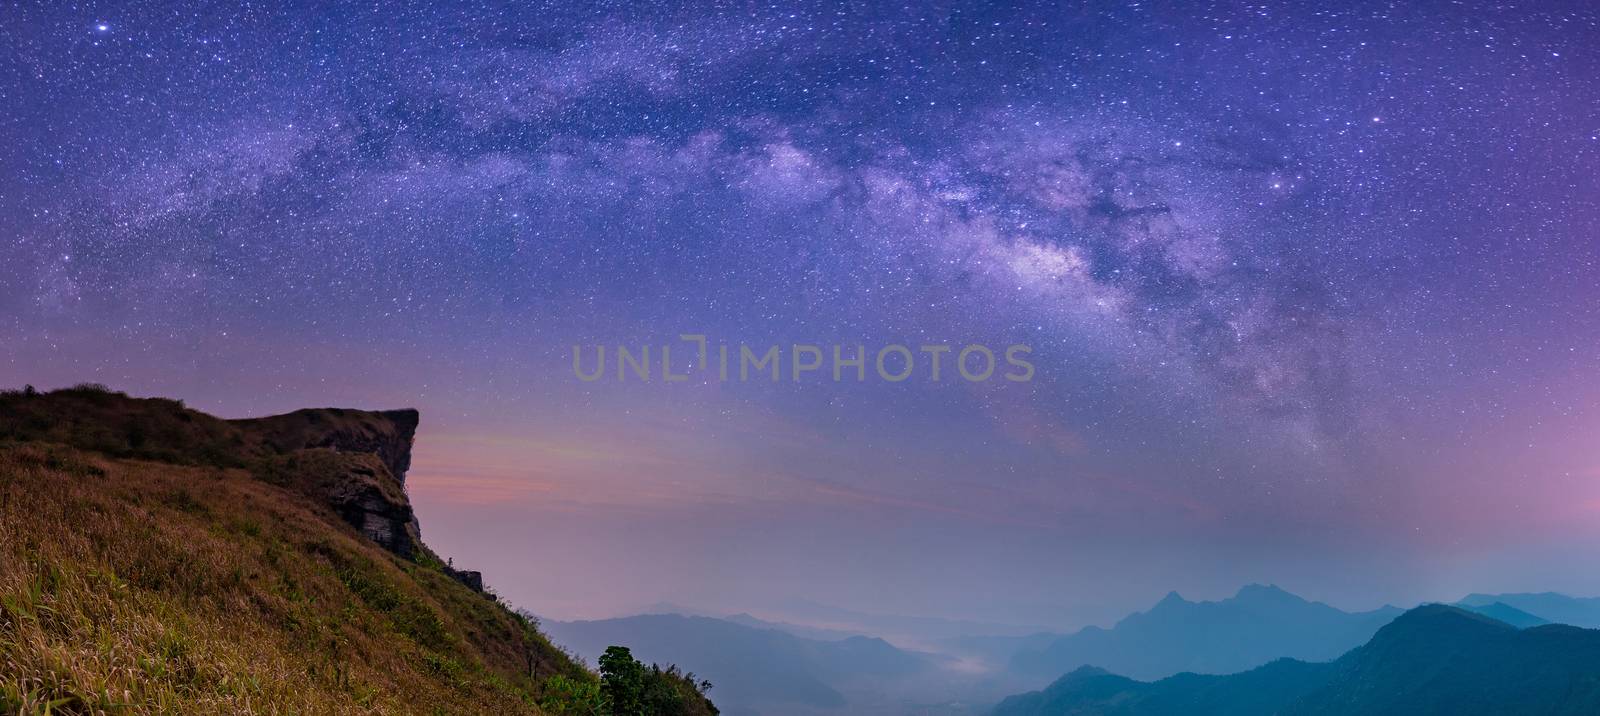 Abstract blurred landscape with Milky way galaxy Night sky with stars and silhouette of rock mountains. Phu Chi Fa View Point at Thoeng District, Chiang Rai Province,Thailand, Long exposure photograph
